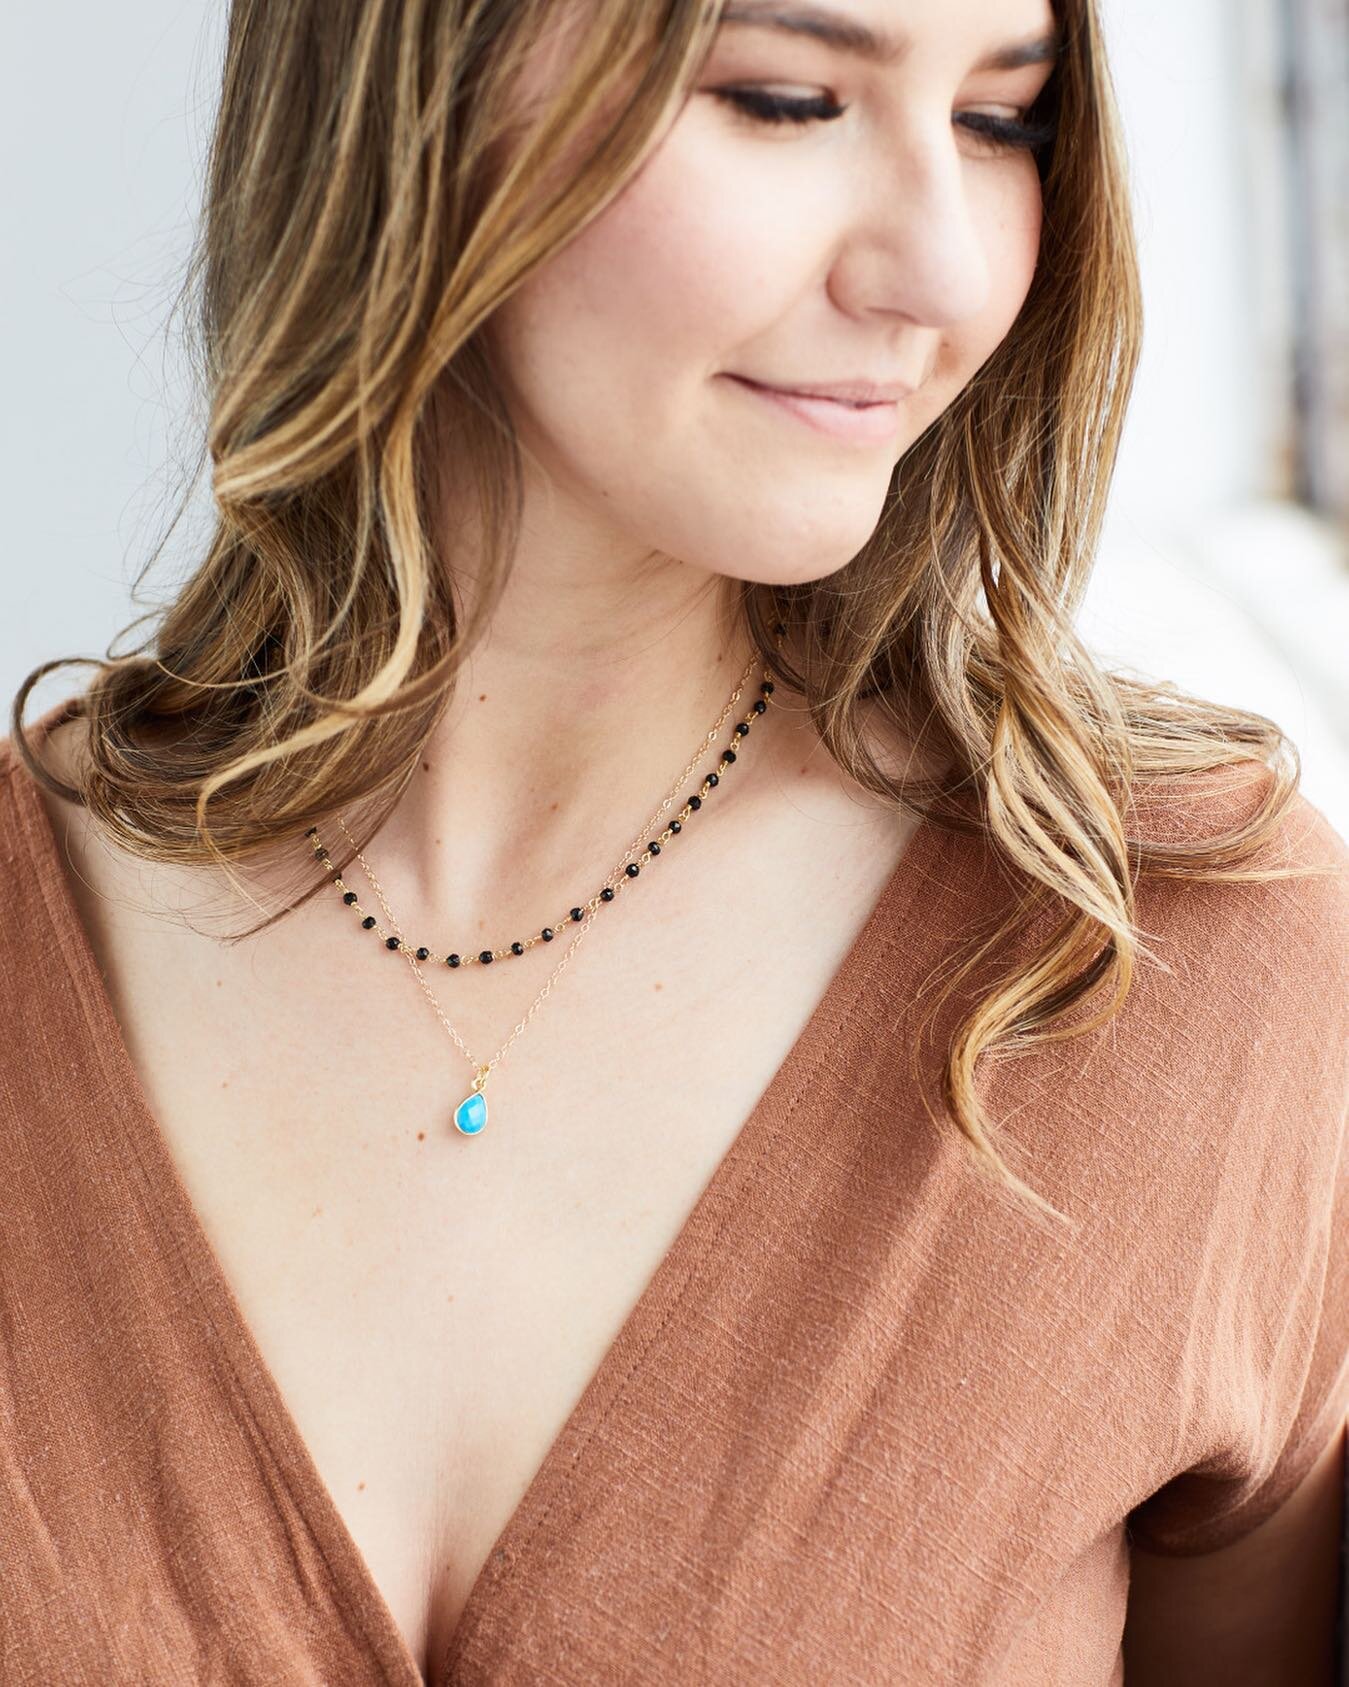 One of our best selling necklaces and it&rsquo;s no wonder! Our bright, faceted Turquoise stone is sure to add a little color and joy to your day. Turquoise is known to bring its wearer luck, peace, and protection. 😊

#layerednecklaces #turquoise #t